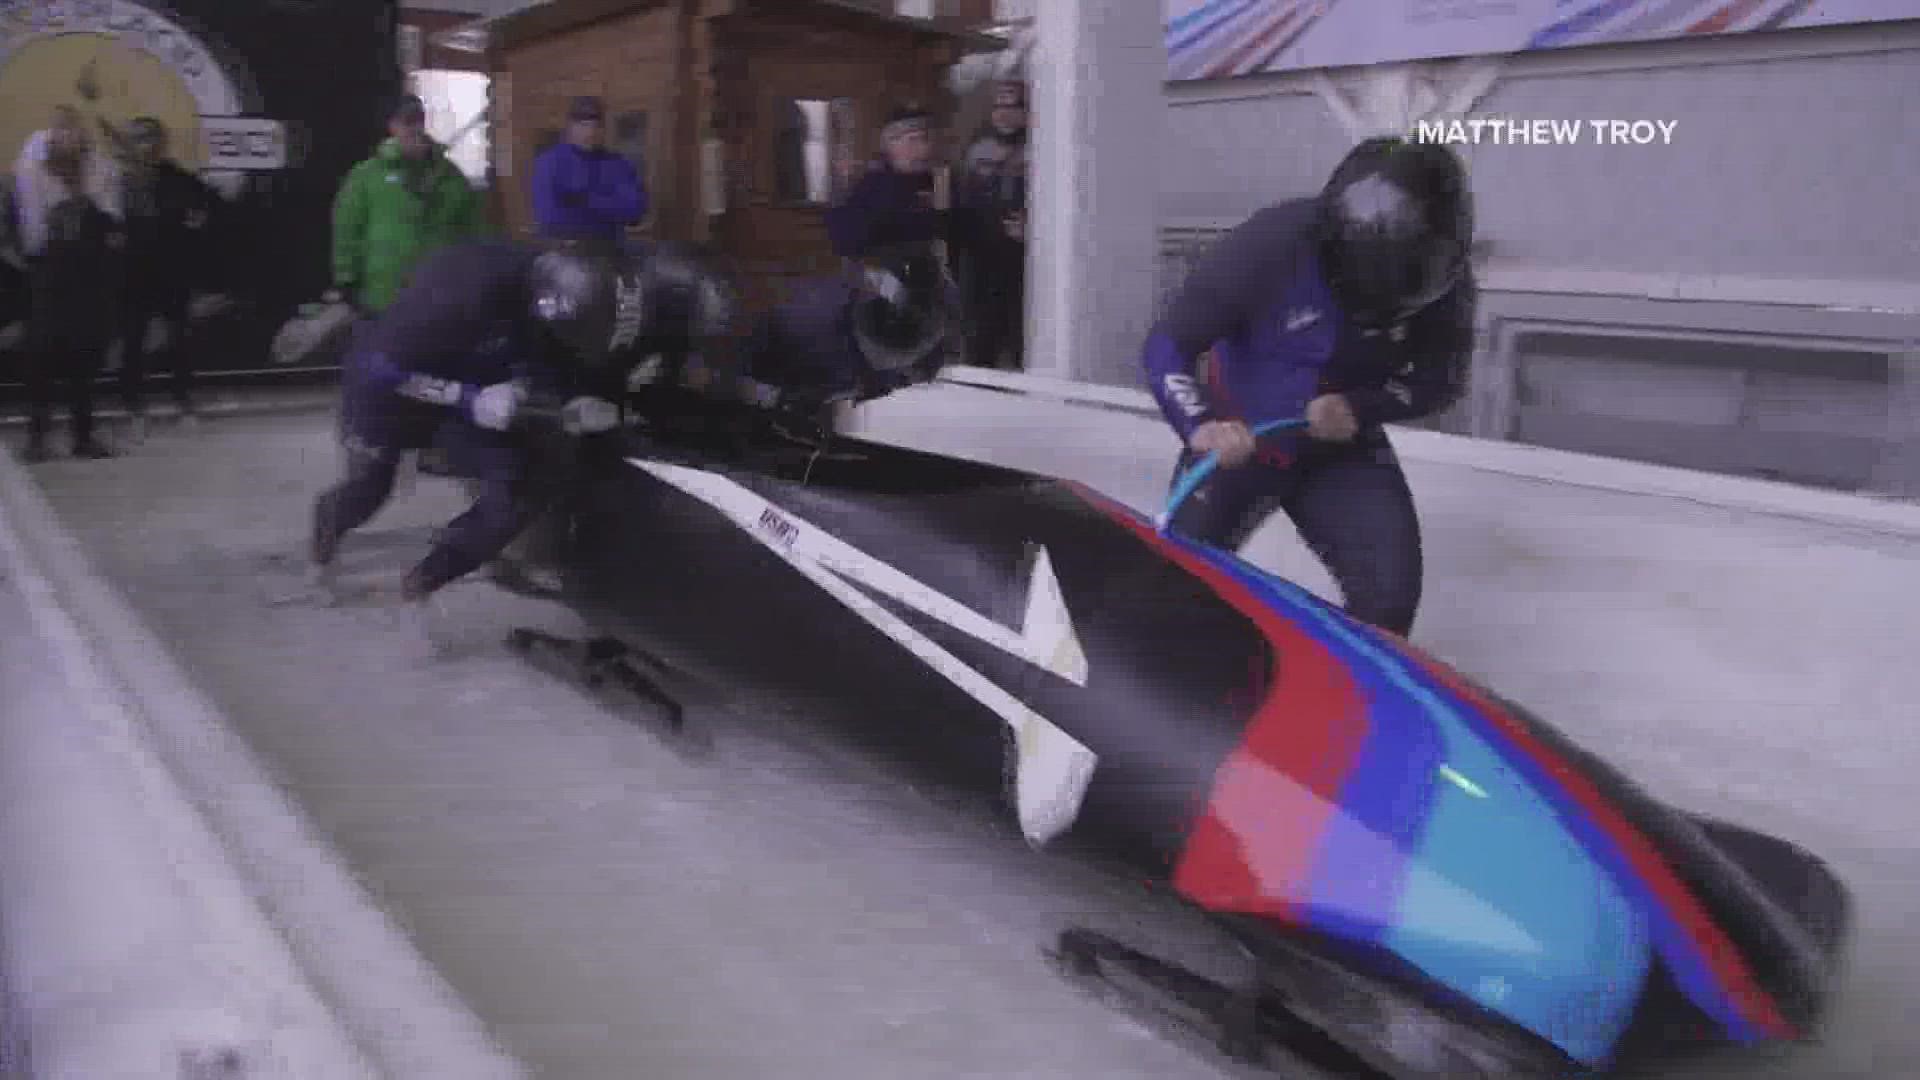 Frank Del Duca of Bethel and UMaine alumnus Jimmy Reed will be joining the rest of Team USA’s bobsled team at the February Olympics.